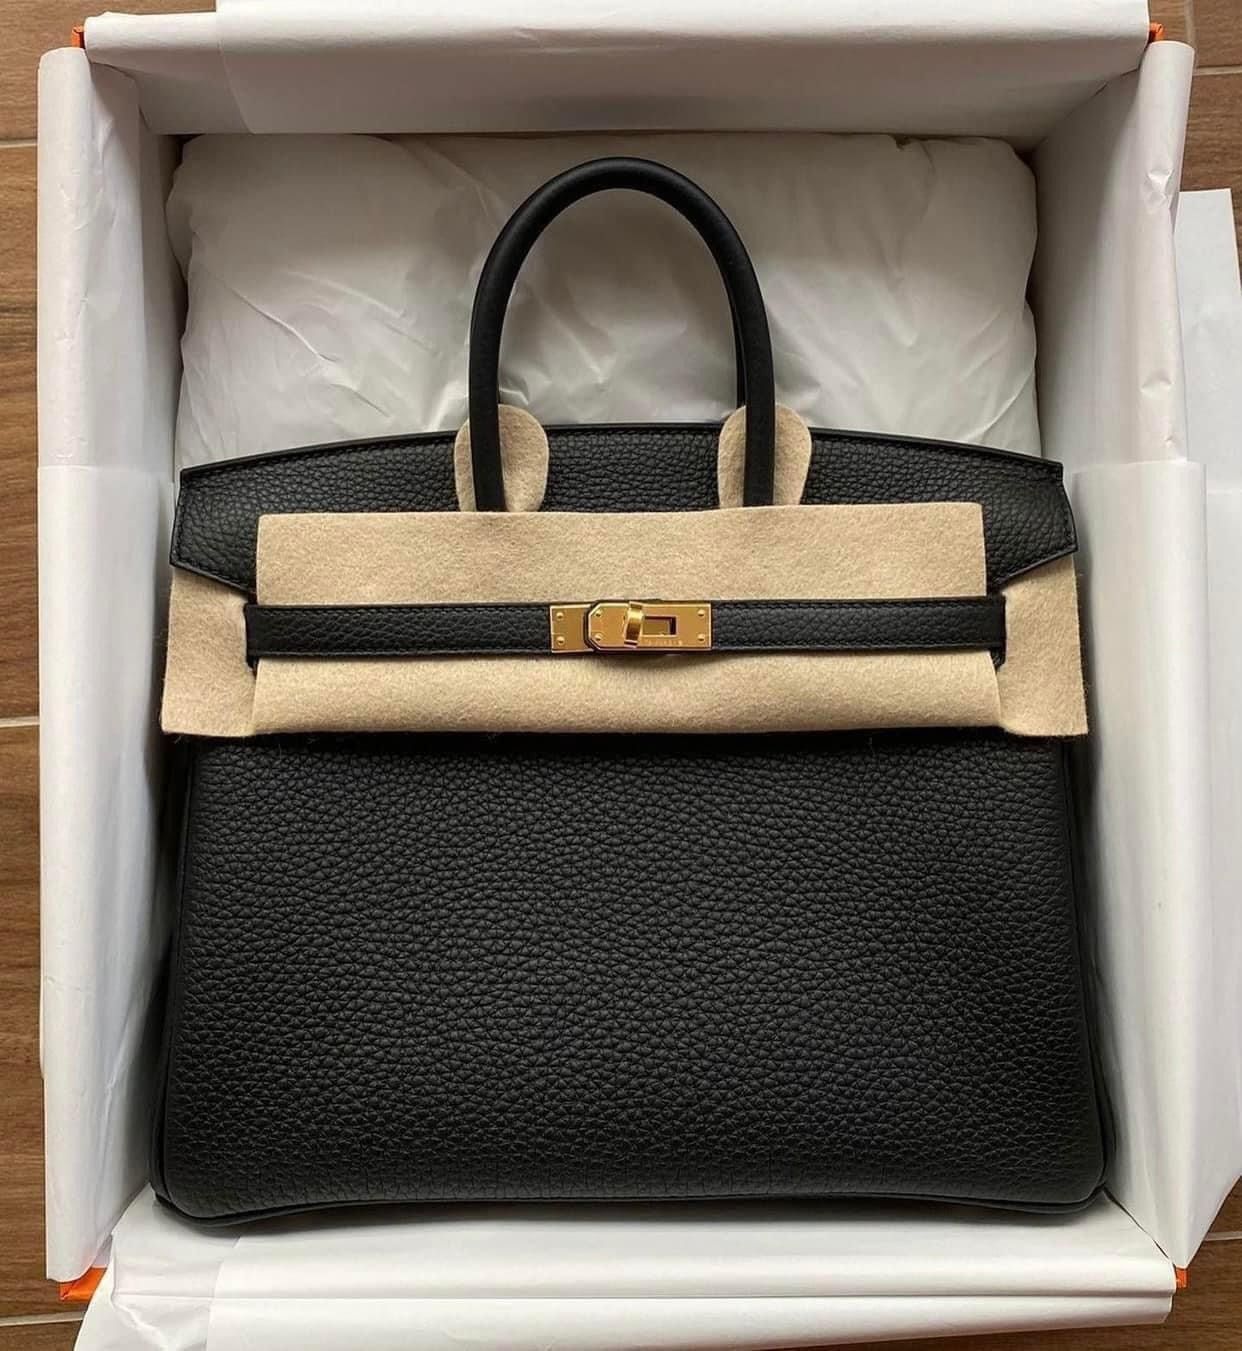 Hermes Kelly 32 Bag 4B Biscuit Swift And Grizzly SHW